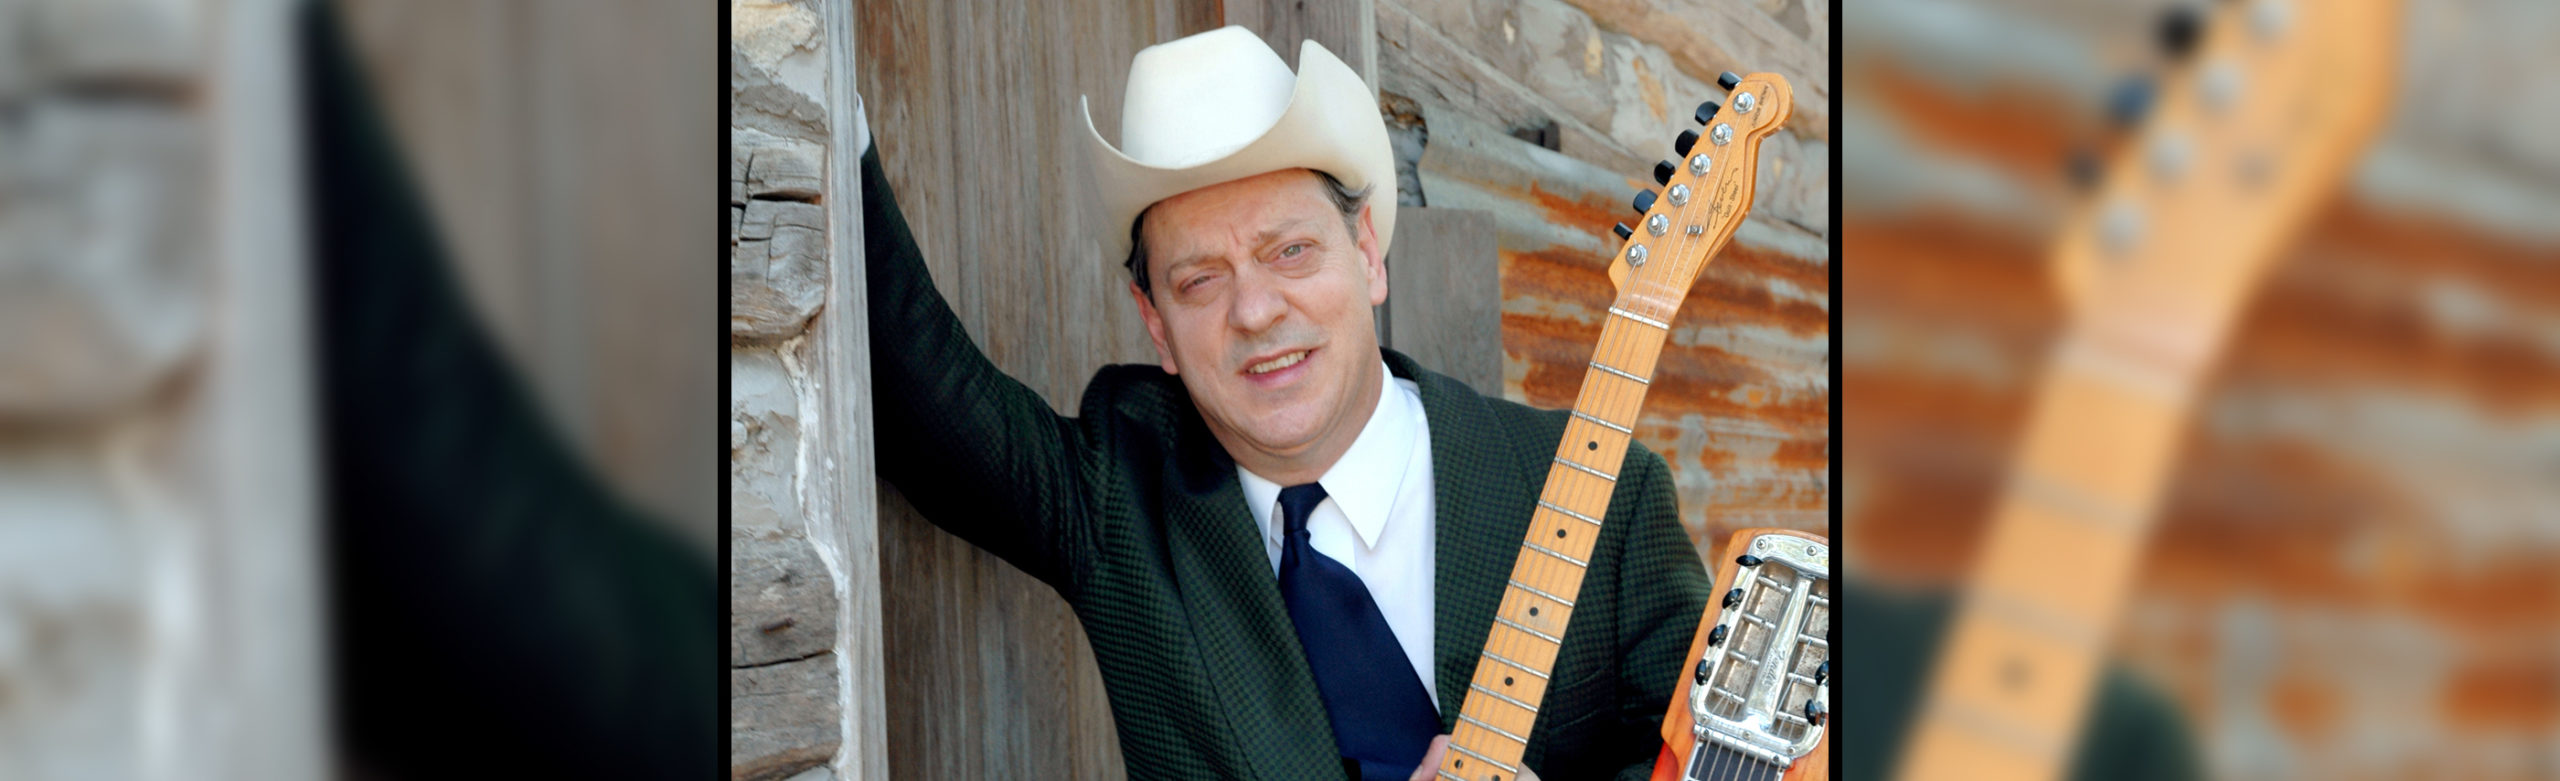 Event Info: Junior Brown at the Top Hat 2019 Image